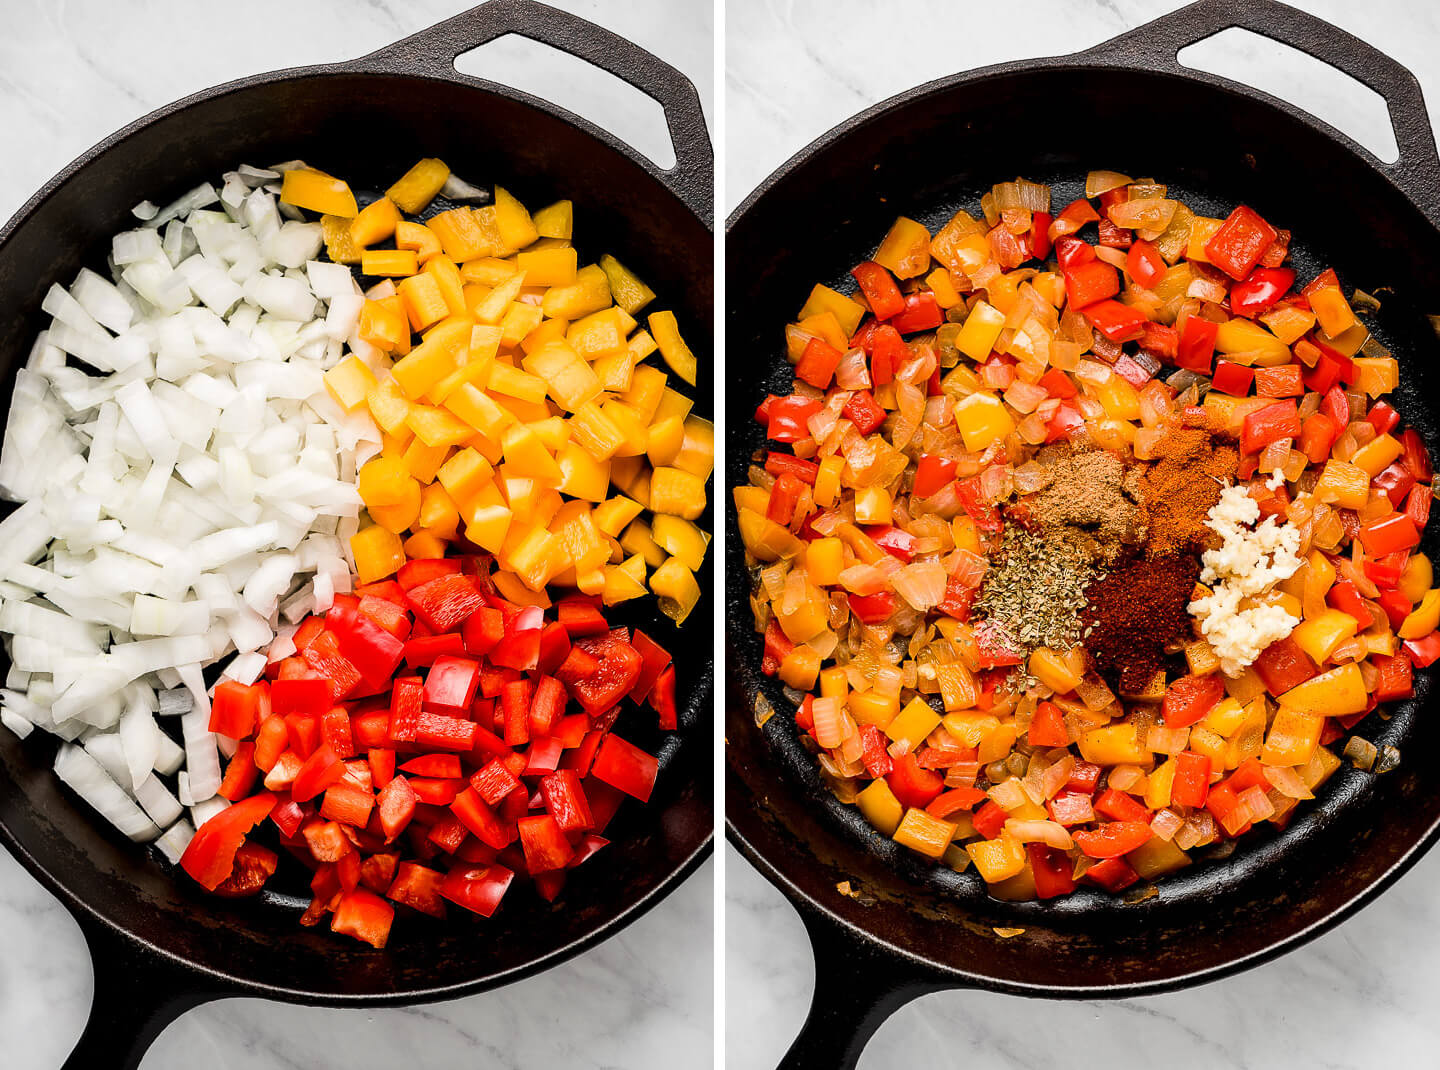 Diptych- Cast iron skillet with raw onion and pepper; cooked onion and peppers with seasonings on top.